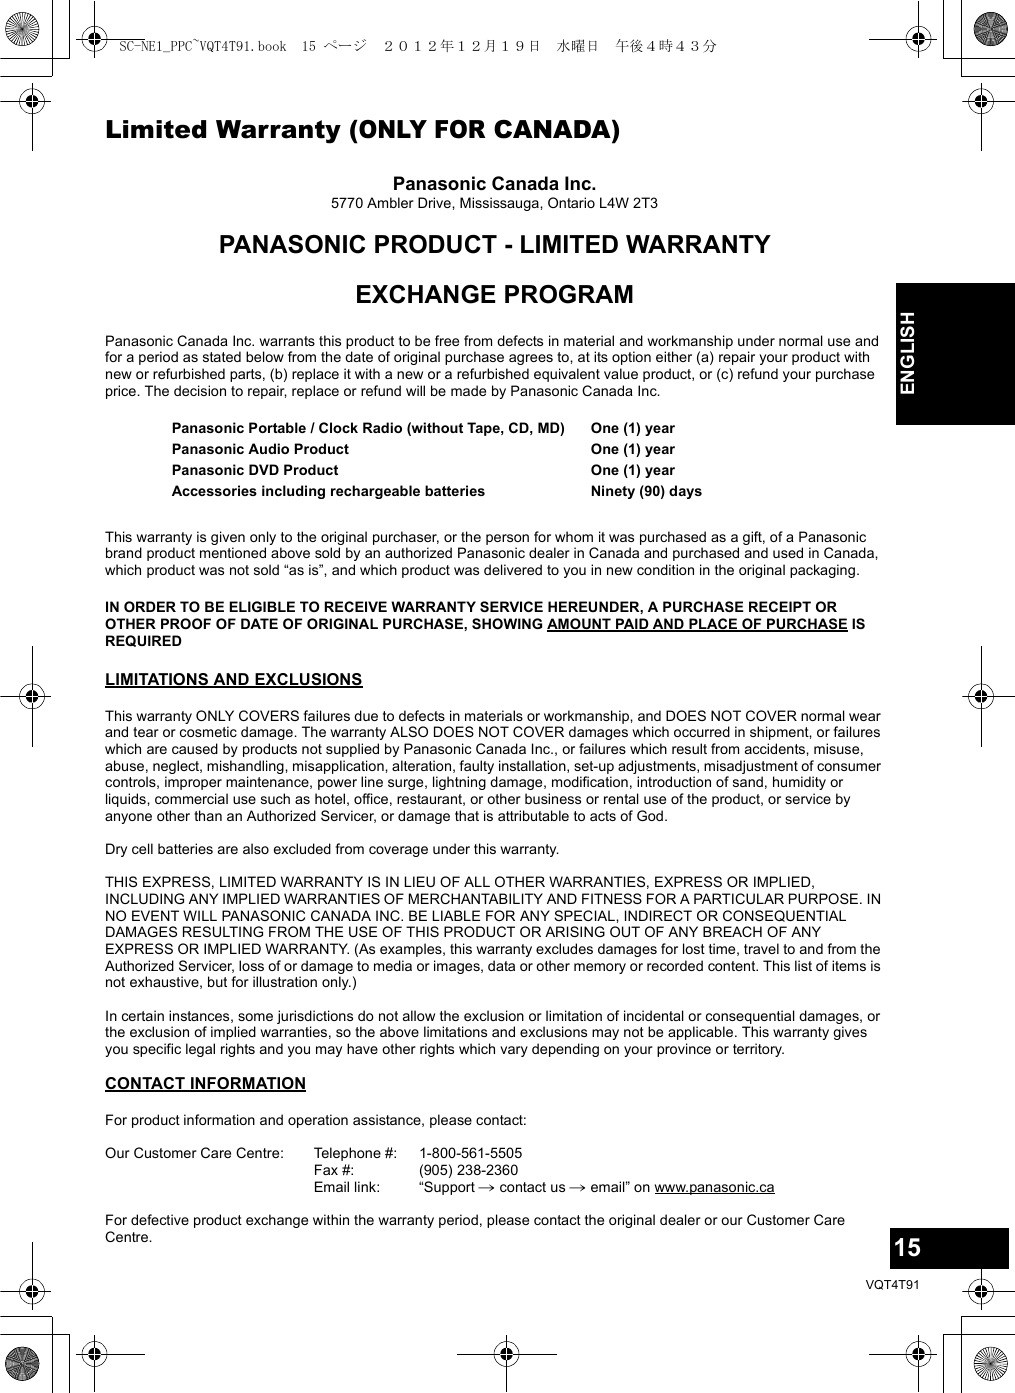 15VQT4T91ENGLISHLimited Warranty (ONLY FOR CANADA)Panasonic Canada Inc.5770 Ambler Drive, Mississauga, Ontario L4W 2T3PANASONIC PRODUCT - LIMITED WARRANTYEXCHANGE PROGRAMPanasonic Canada Inc. warrants this product to be free from defects in material and workmanship under normal use and for a period as stated below from the date of original purchase agrees to, at its option either (a) repair your product with new or refurbished parts, (b) replace it with a new or a refurbished equivalent value product, or (c) refund your purchase price. The decision to repair, replace or refund will be made by Panasonic Canada Inc.This warranty is given only to the original purchaser, or the person for whom it was purchased as a gift, of a Panasonic brand product mentioned above sold by an authorized Panasonic dealer in Canada and purchased and used in Canada, which product was not sold “as is”, and which product was delivered to you in new condition in the original packaging.IN ORDER TO BE ELIGIBLE TO RECEIVE WARRANTY SERVICE HEREUNDER, A PURCHASE RECEIPT OR OTHER PROOF OF DATE OF ORIGINAL PURCHASE, SHOWING AMOUNT PAID AND PLACE OF PURCHASE IS REQUIRED LIMITATIONS AND EXCLUSIONSThis warranty ONLY COVERS failures due to defects in materials or workmanship, and DOES NOT COVER normal wear and tear or cosmetic damage. The warranty ALSO DOES NOT COVER damages which occurred in shipment, or failures which are caused by products not supplied by Panasonic Canada Inc., or failures which result from accidents, misuse, abuse, neglect, mishandling, misapplication, alteration, faulty installation, set-up adjustments, misadjustment of consumer controls, improper maintenance, power line surge, lightning damage, modification, introduction of sand, humidity or liquids, commercial use such as hotel, office, restaurant, or other business or rental use of the product, or service by anyone other than an Authorized Servicer, or damage that is attributable to acts of God.Dry cell batteries are also excluded from coverage under this warranty.THIS EXPRESS, LIMITED WARRANTY IS IN LIEU OF ALL OTHER WARRANTIES, EXPRESS OR IMPLIED, INCLUDING ANY IMPLIED WARRANTIES OF MERCHANTABILITY AND FITNESS FOR A PARTICULAR PURPOSE. IN NO EVENT WILL PANASONIC CANADA INC. BE LIABLE FOR ANY SPECIAL, INDIRECT OR CONSEQUENTIAL DAMAGES RESULTING FROM THE USE OF THIS PRODUCT OR ARISING OUT OF ANY BREACH OF ANY EXPRESS OR IMPLIED WARRANTY. (As examples, this warranty excludes damages for lost time, travel to and from the Authorized Servicer, loss of or damage to media or images, data or other memory or recorded content. This list of items is not exhaustive, but for illustration only.)In certain instances, some jurisdictions do not allow the exclusion or limitation of incidental or consequential damages, or the exclusion of implied warranties, so the above limitations and exclusions may not be applicable. This warranty gives you specific legal rights and you may have other rights which vary depending on your province or territory.CONTACT INFORMATIONPanasonic Portable / Clock Radio (without Tape, CD, MD)Panasonic Audio ProductPanasonic DVD ProductAccessories including rechargeable batteriesOne (1) yearOne (1) yearOne (1) yearNinety (90) daysFor product information and operation assistance, please contact:Our Customer Care Centre: Telephone #:Fax #:Email link:1-800-561-5505(905) 238-2360“Support # contact us # email” on www.panasonic.caFor defective product exchange within the warranty period, please contact the original dealer or our Customer Care Centre.SC-NE1_PPC~VQT4T91.book  15 ページ  ２０１２年１２月１９日　水曜日　午後４時４３分